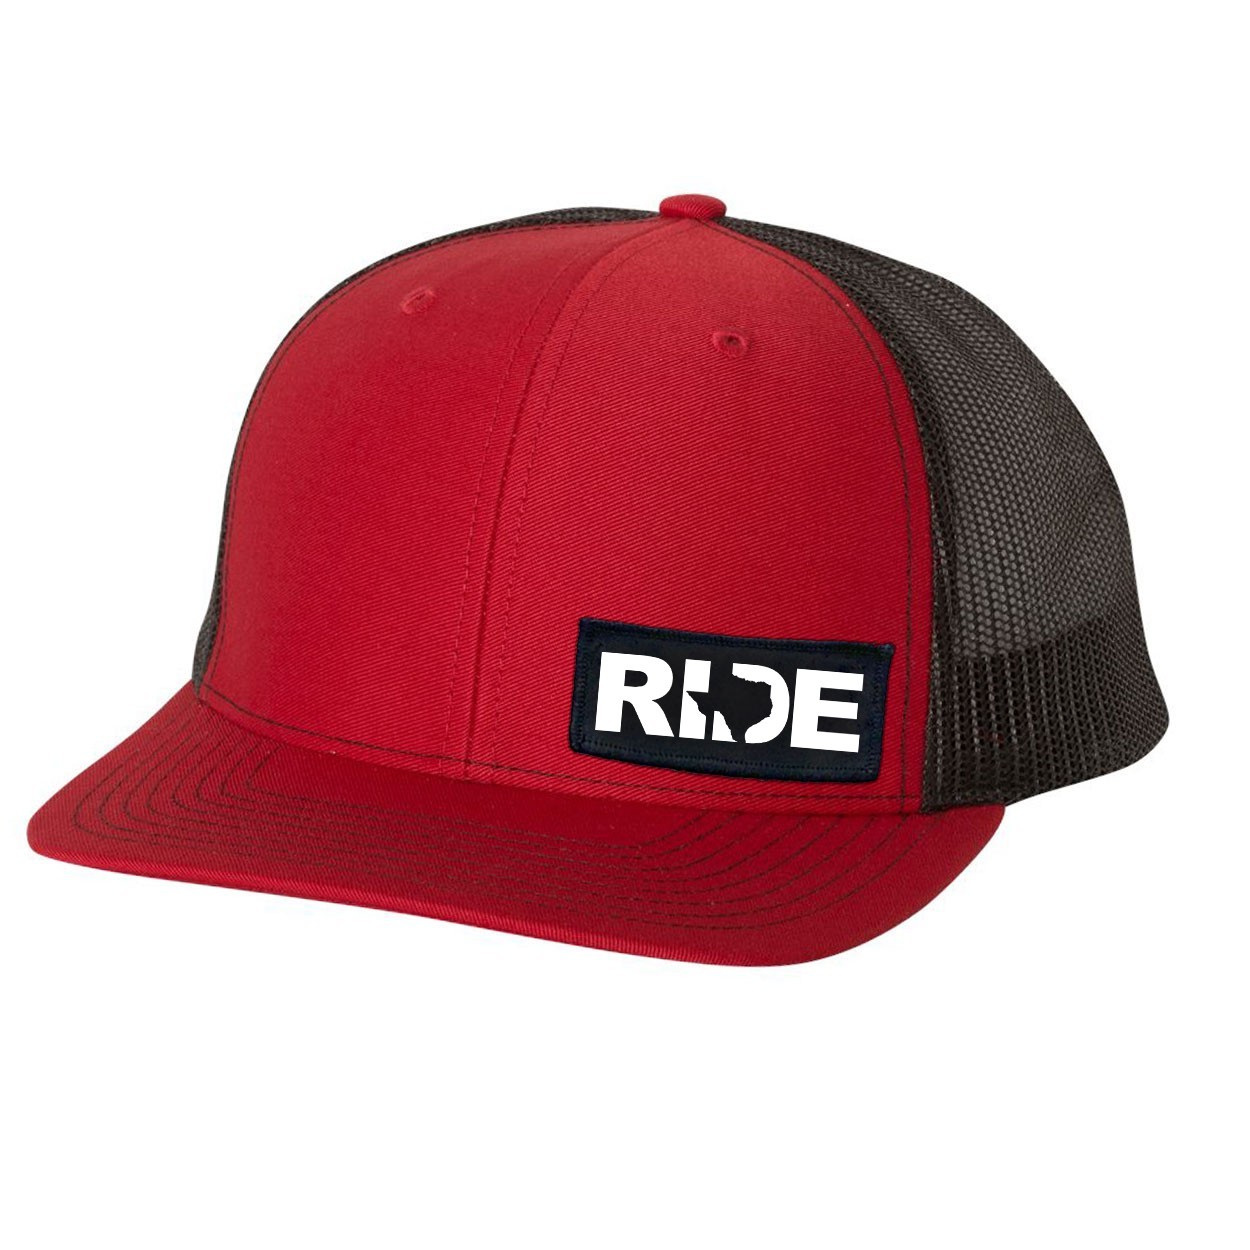 Ride Texas Night Out Woven Patch Snapback Trucker Hat Red/Black (White Logo)